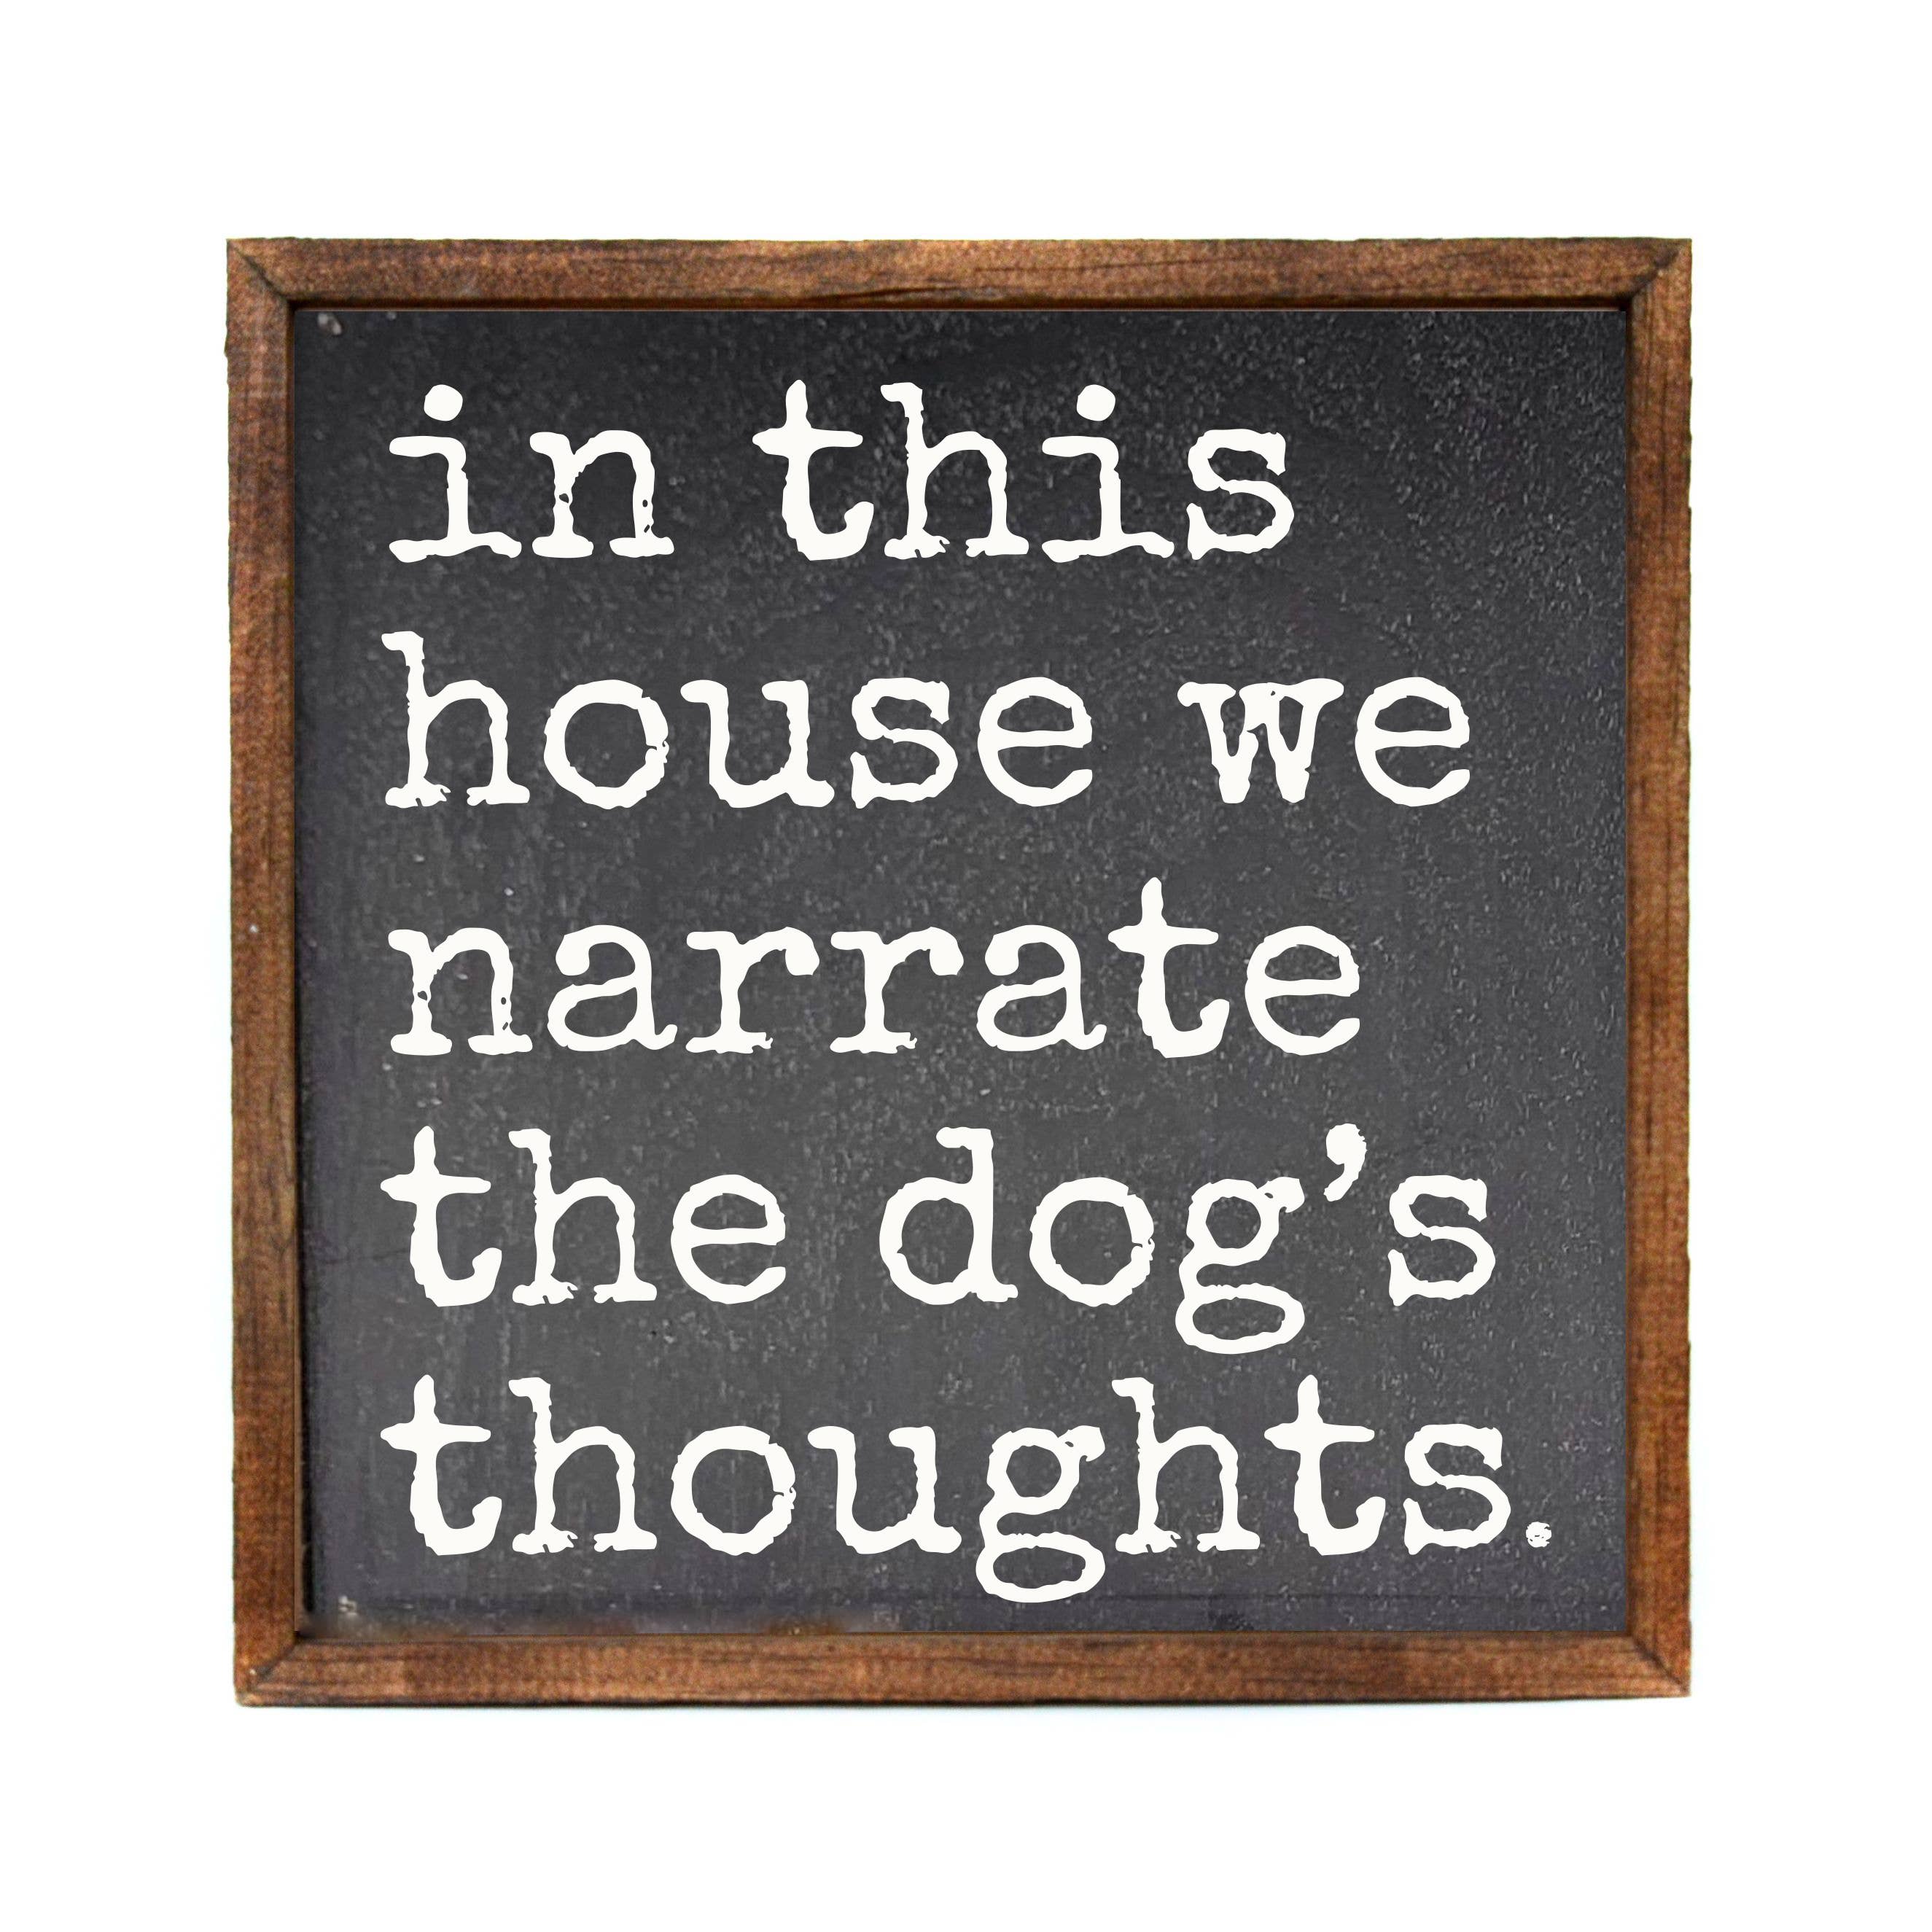 Narrate The Dog's Thoughts - Sign